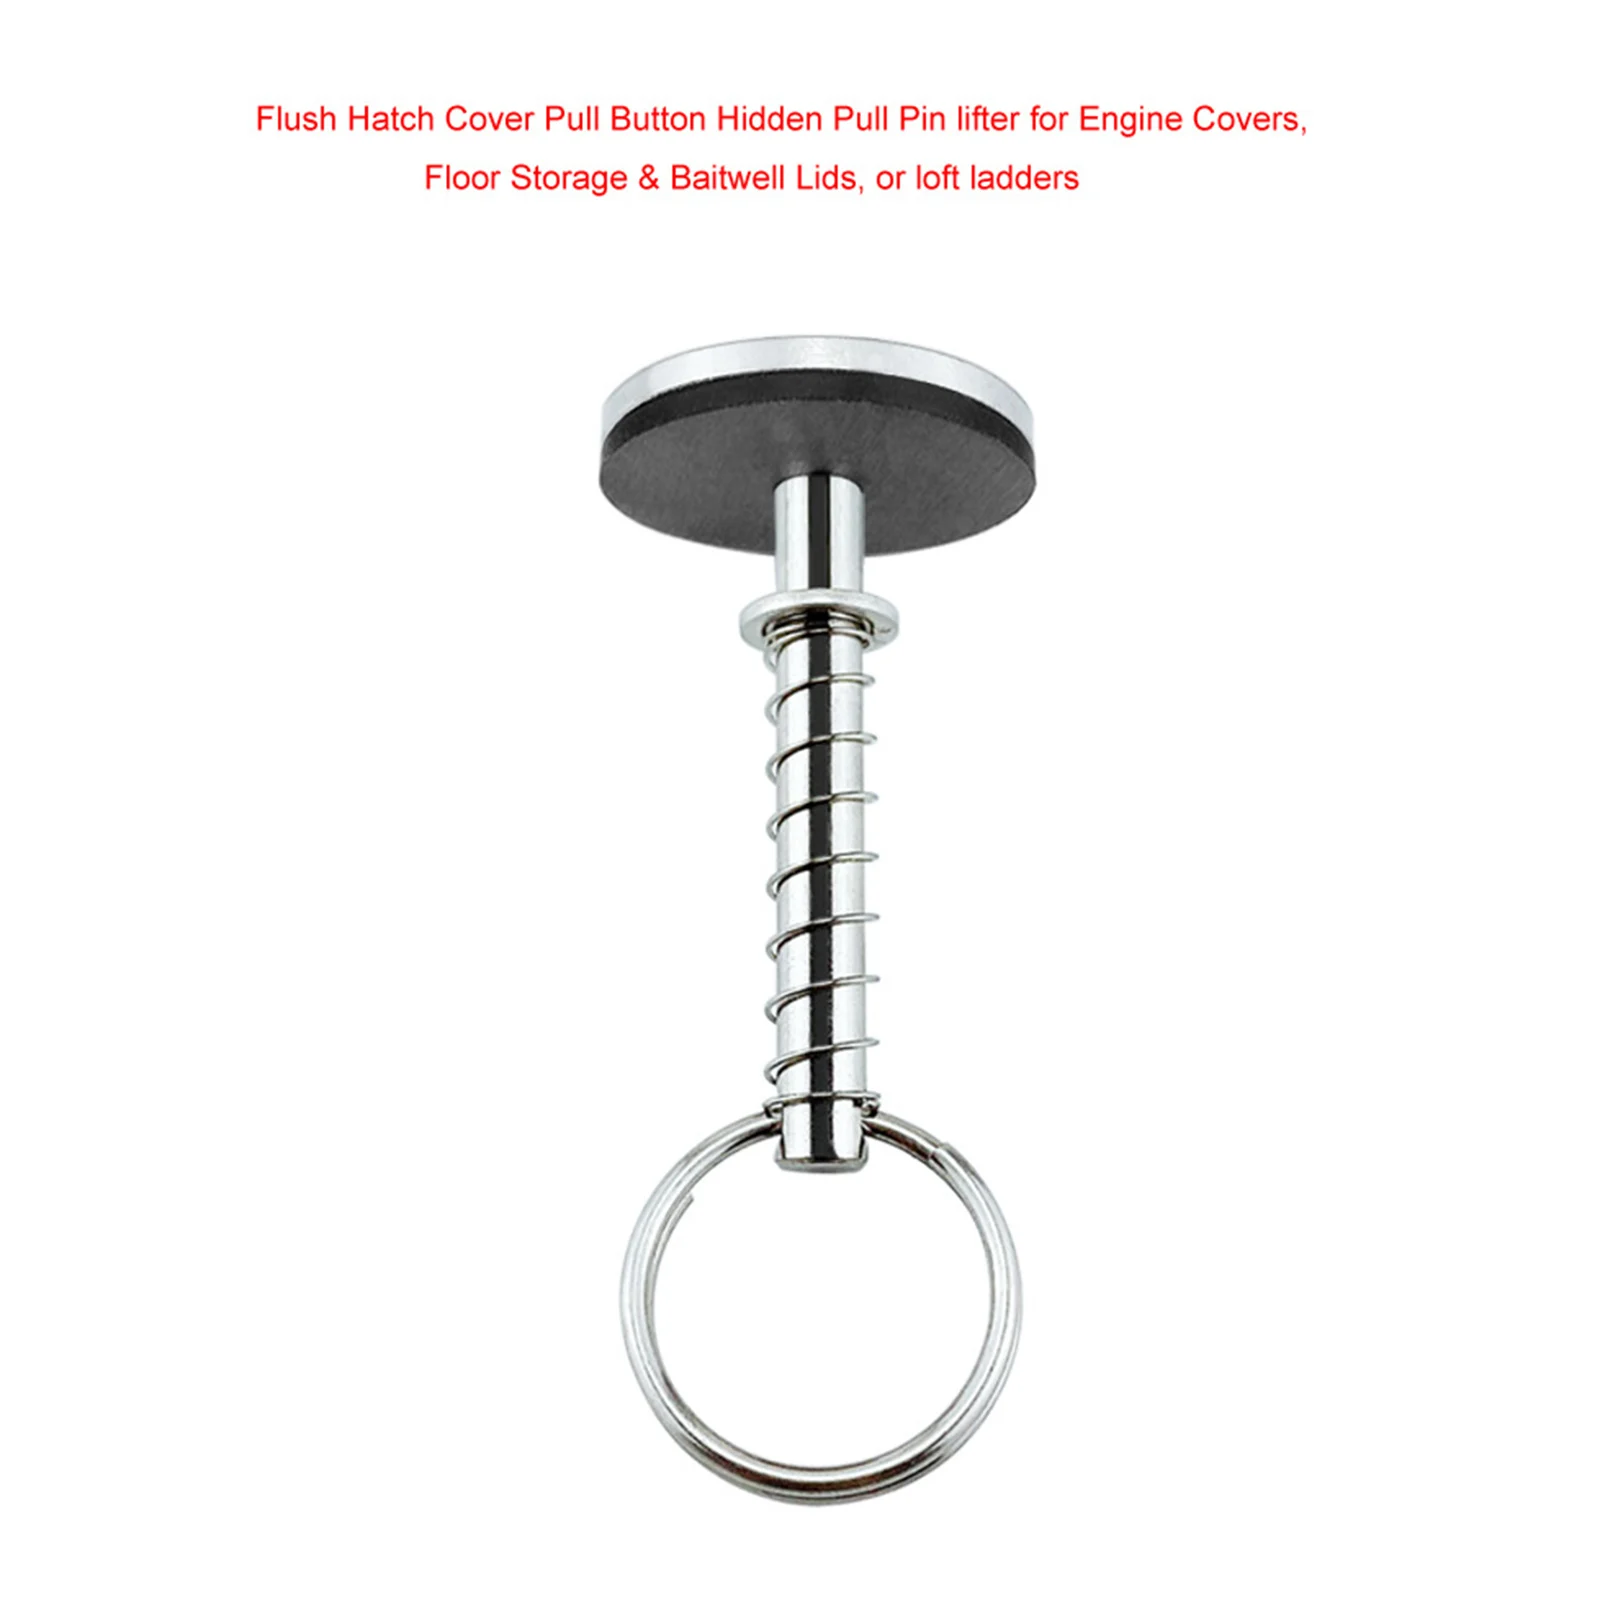 Stainless Steel Boat Hatch Cover Pull Button with Spring Hidden Pull Pin Lifter for Engine Cover Floor Storage Loft Ladders